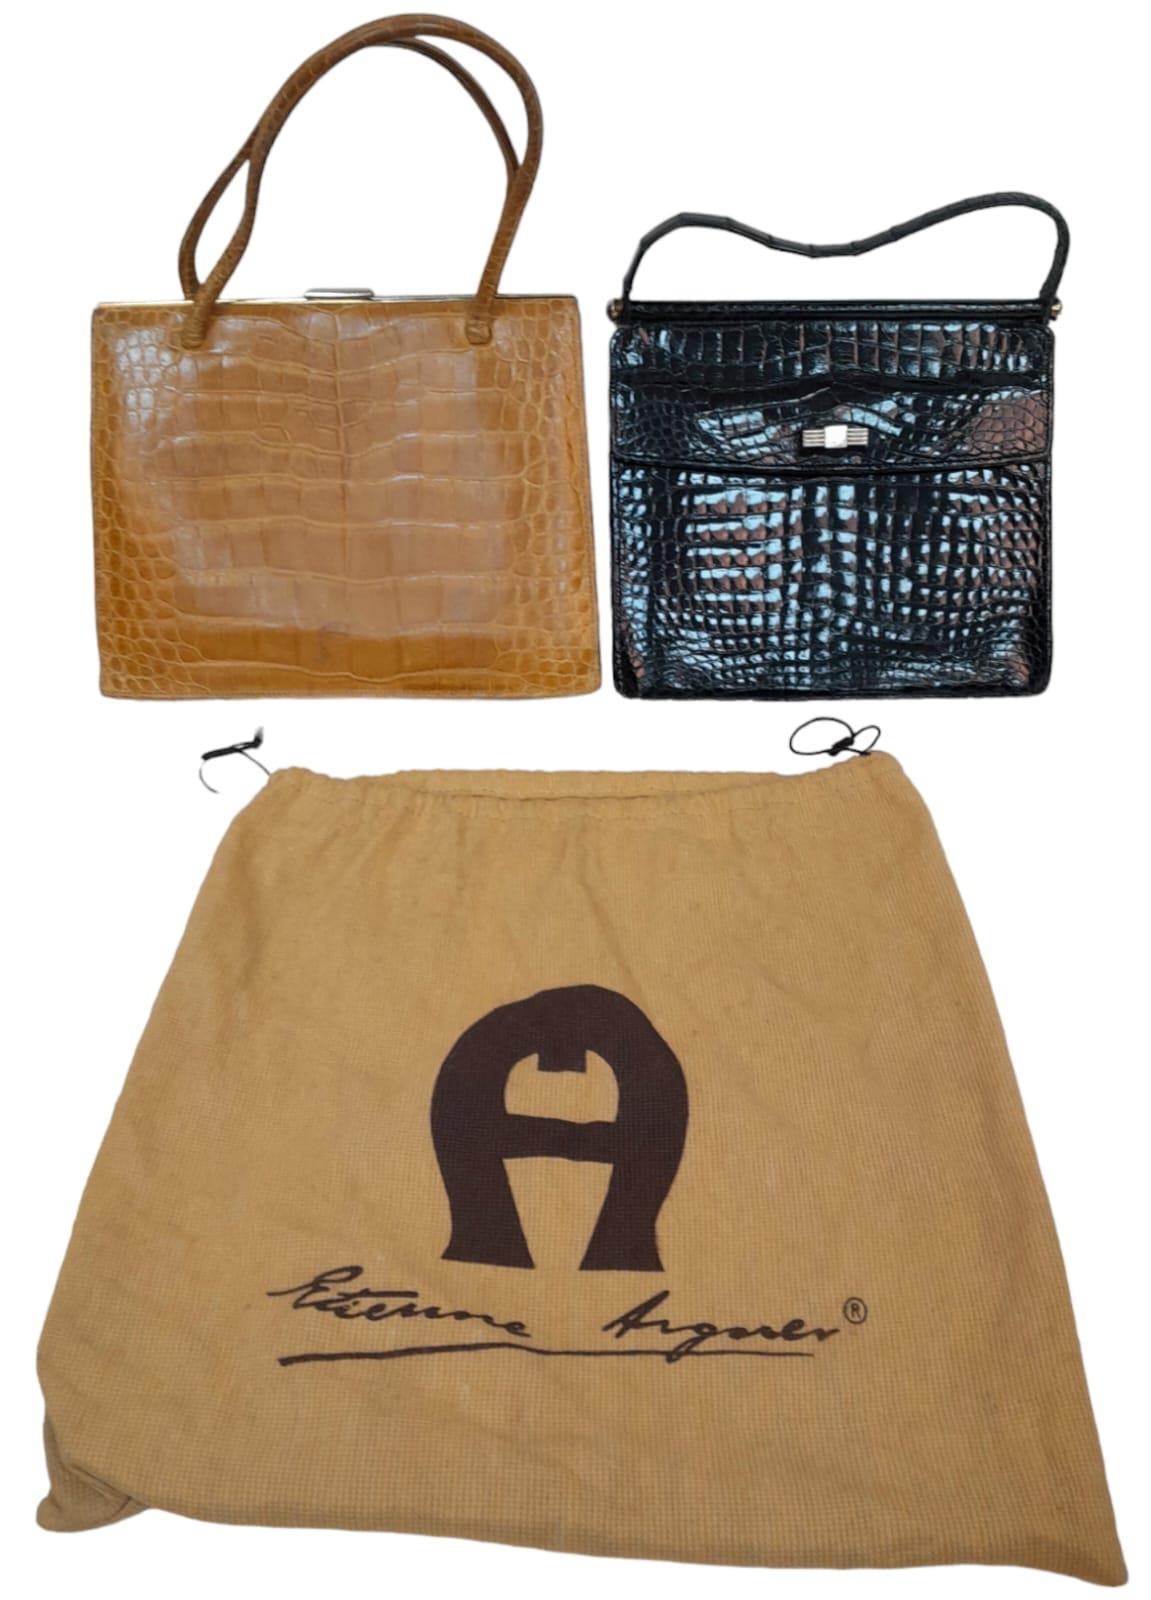 Two Crocodile Leather Hand Bags. Black crocodile bag has gold-toned hardware, a single strap and - Image 3 of 6